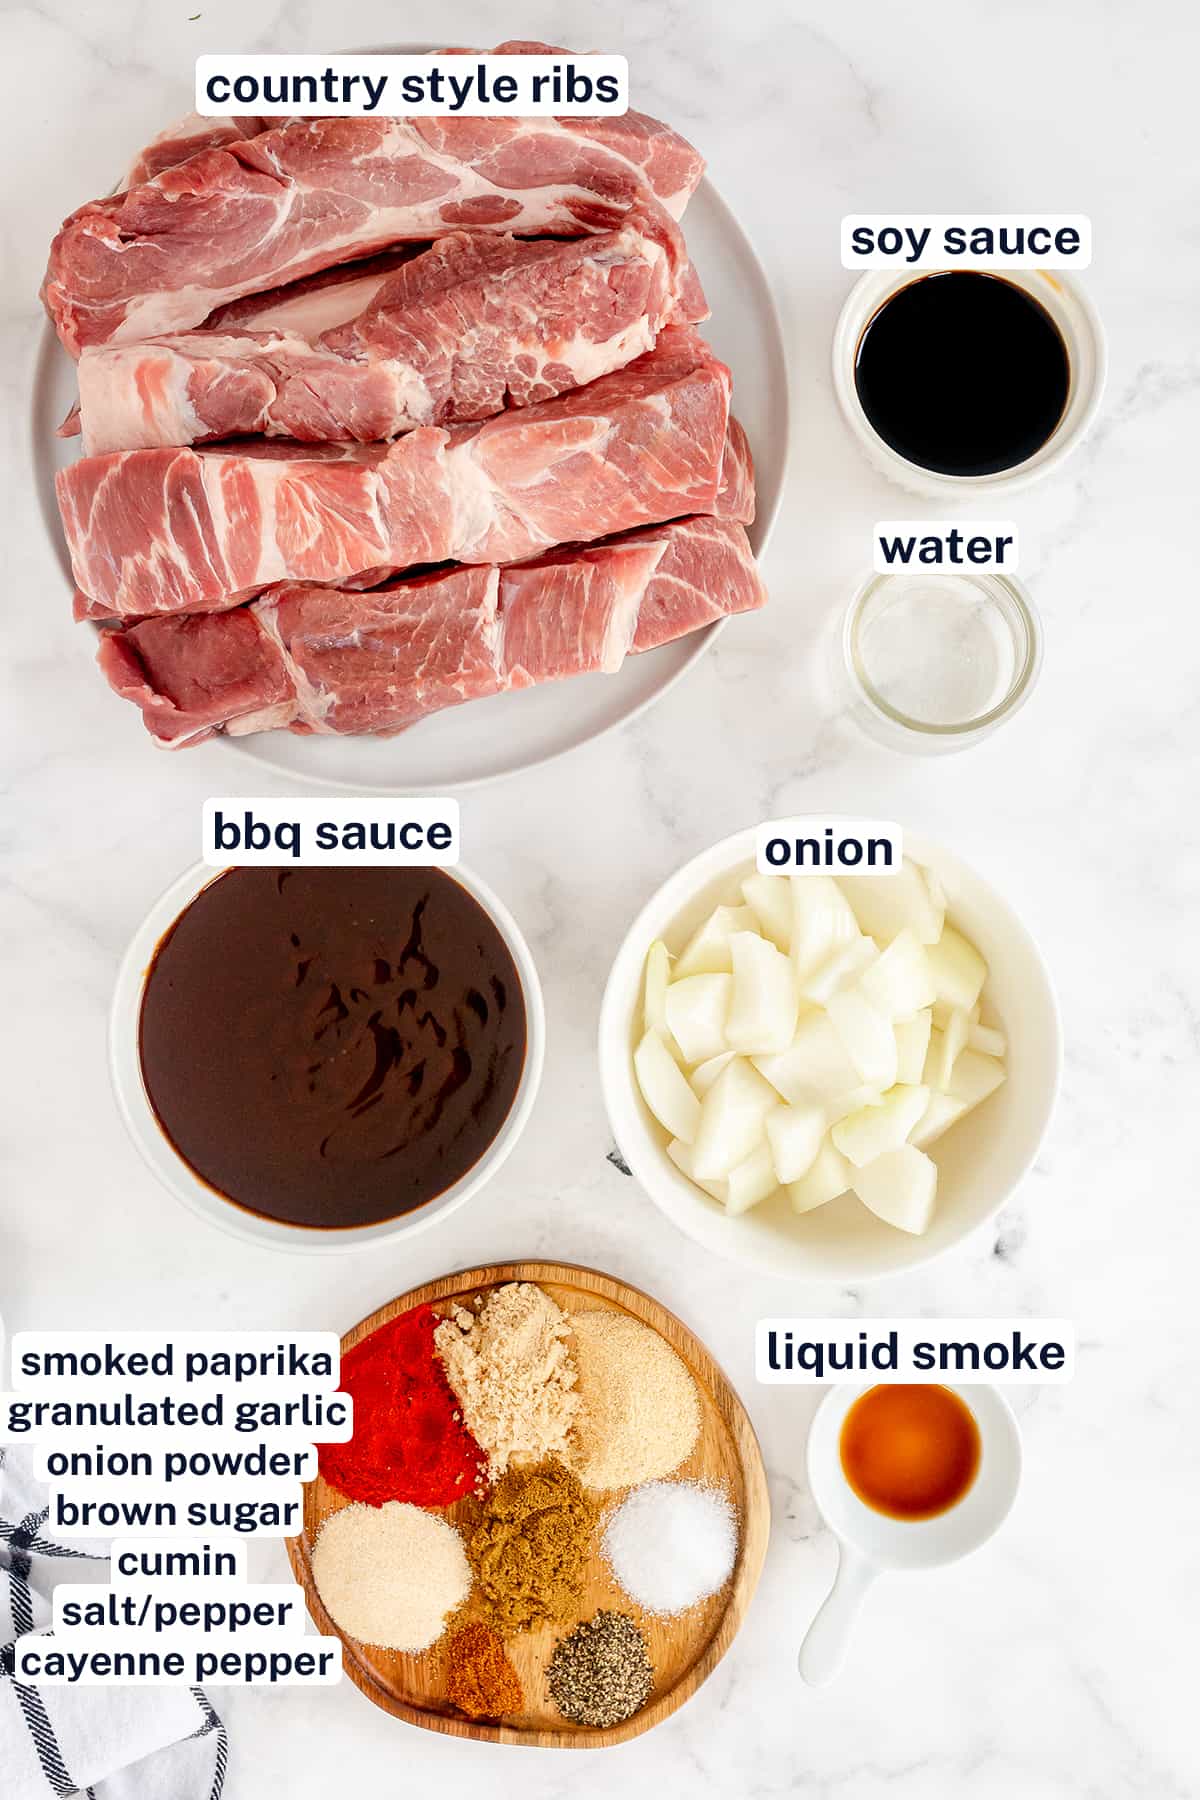 Ingredients for BBQ Country Style Ribs with text overlay.